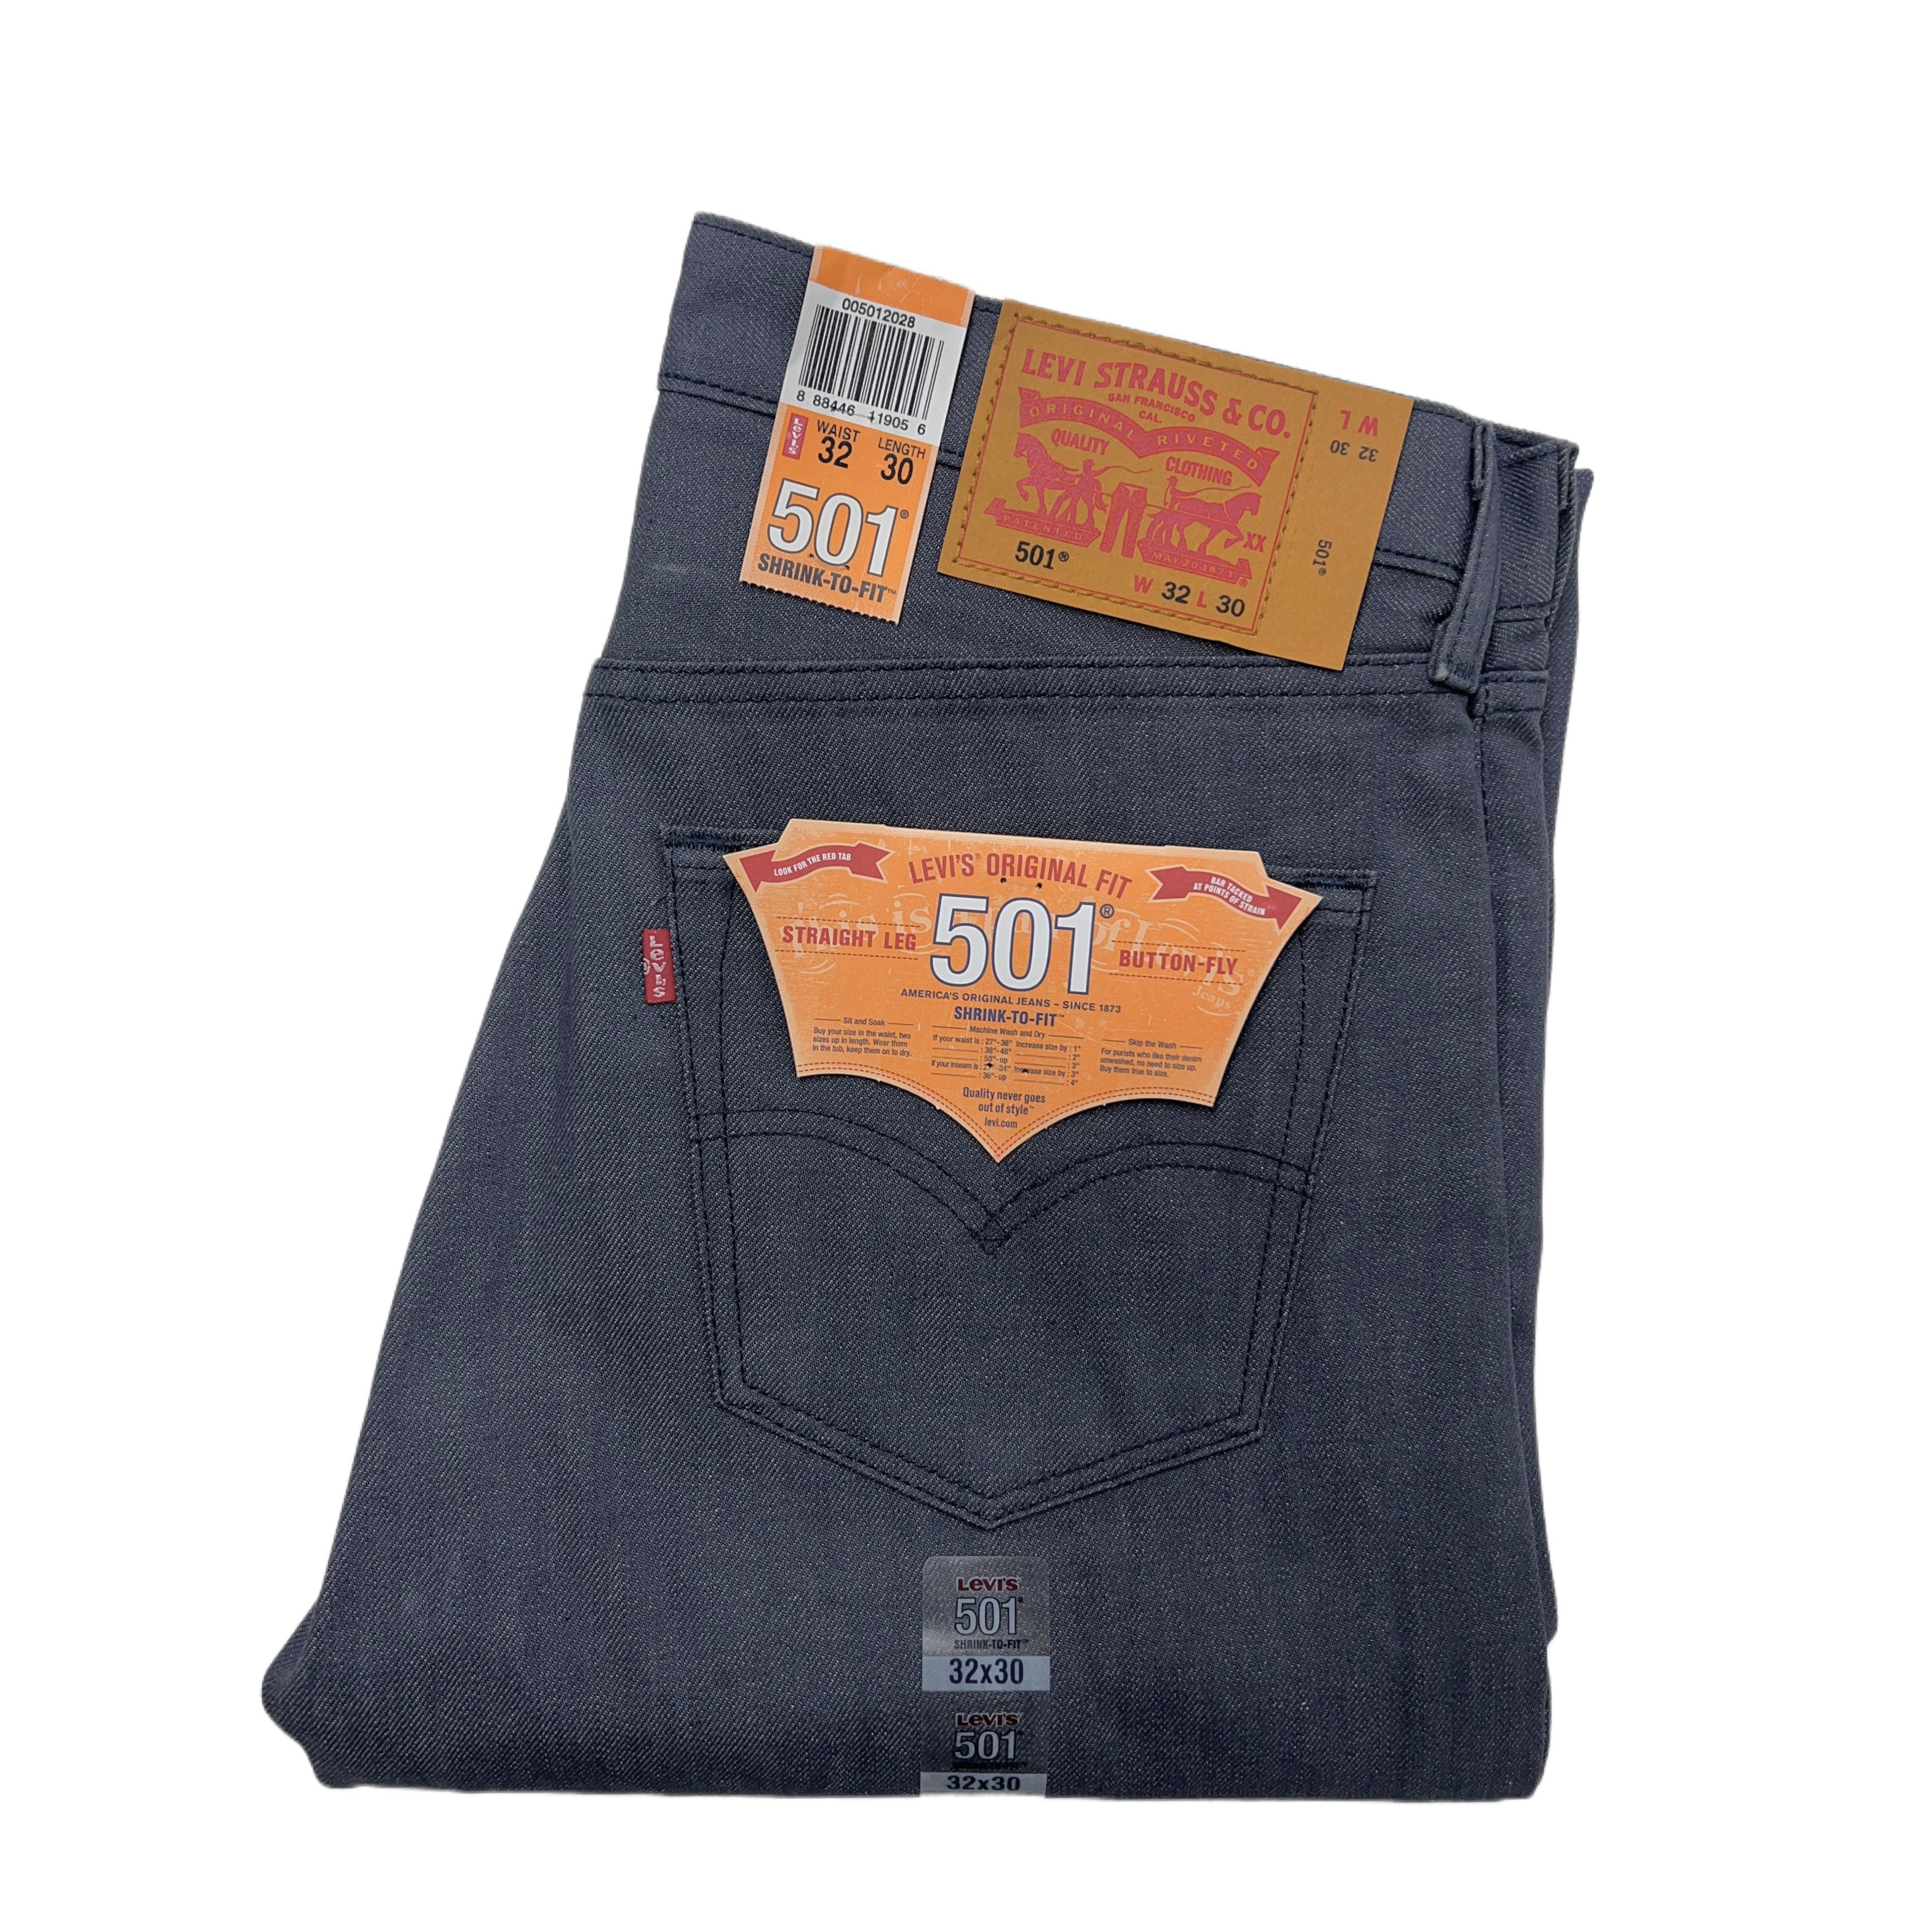 Levi's 501 Shrink-to-Fit - Ash Charcoal - 2028